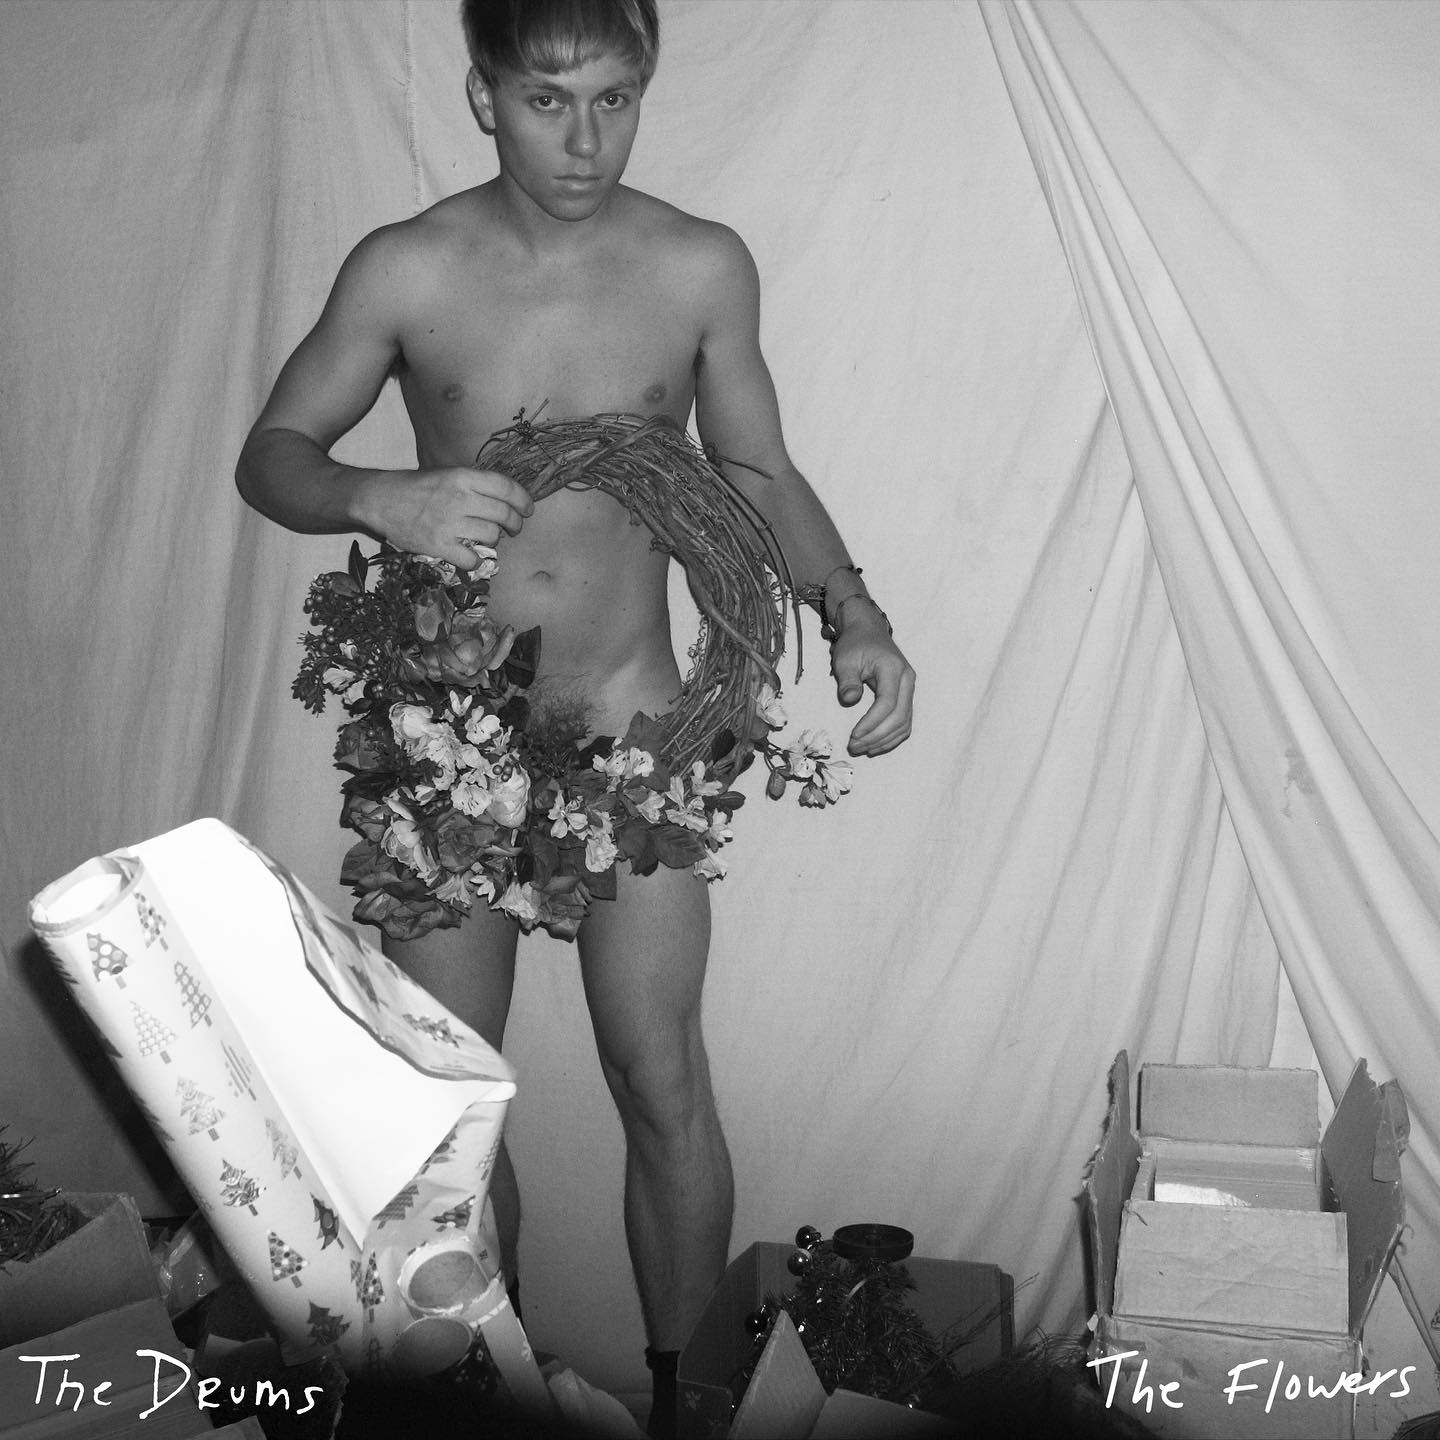 The Drums, The Flowers Download MP3 